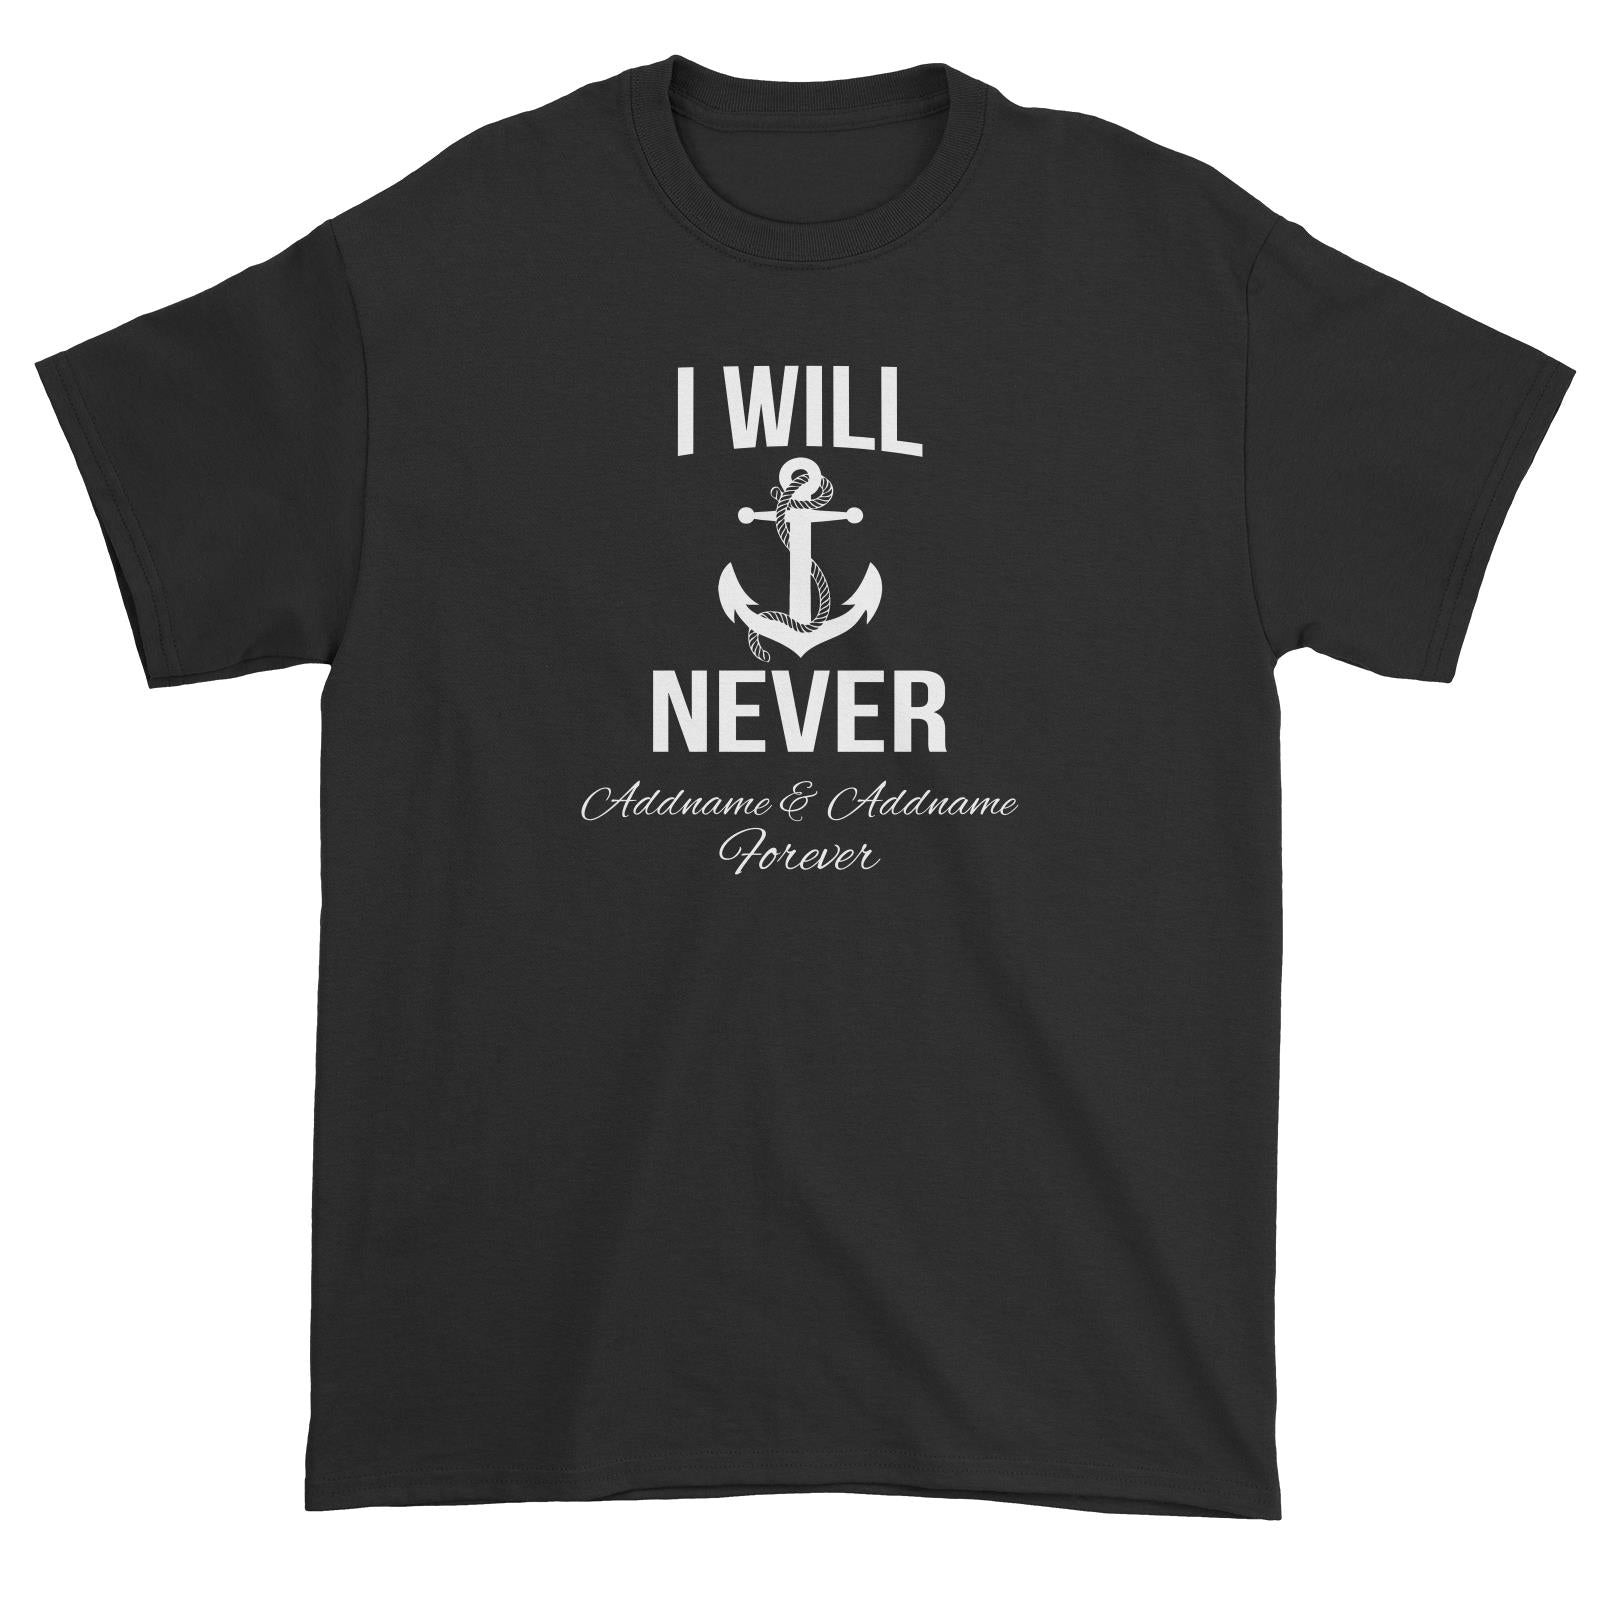 Couple Series I Will Never Addname & Addname Forever Unisex T-Shirt